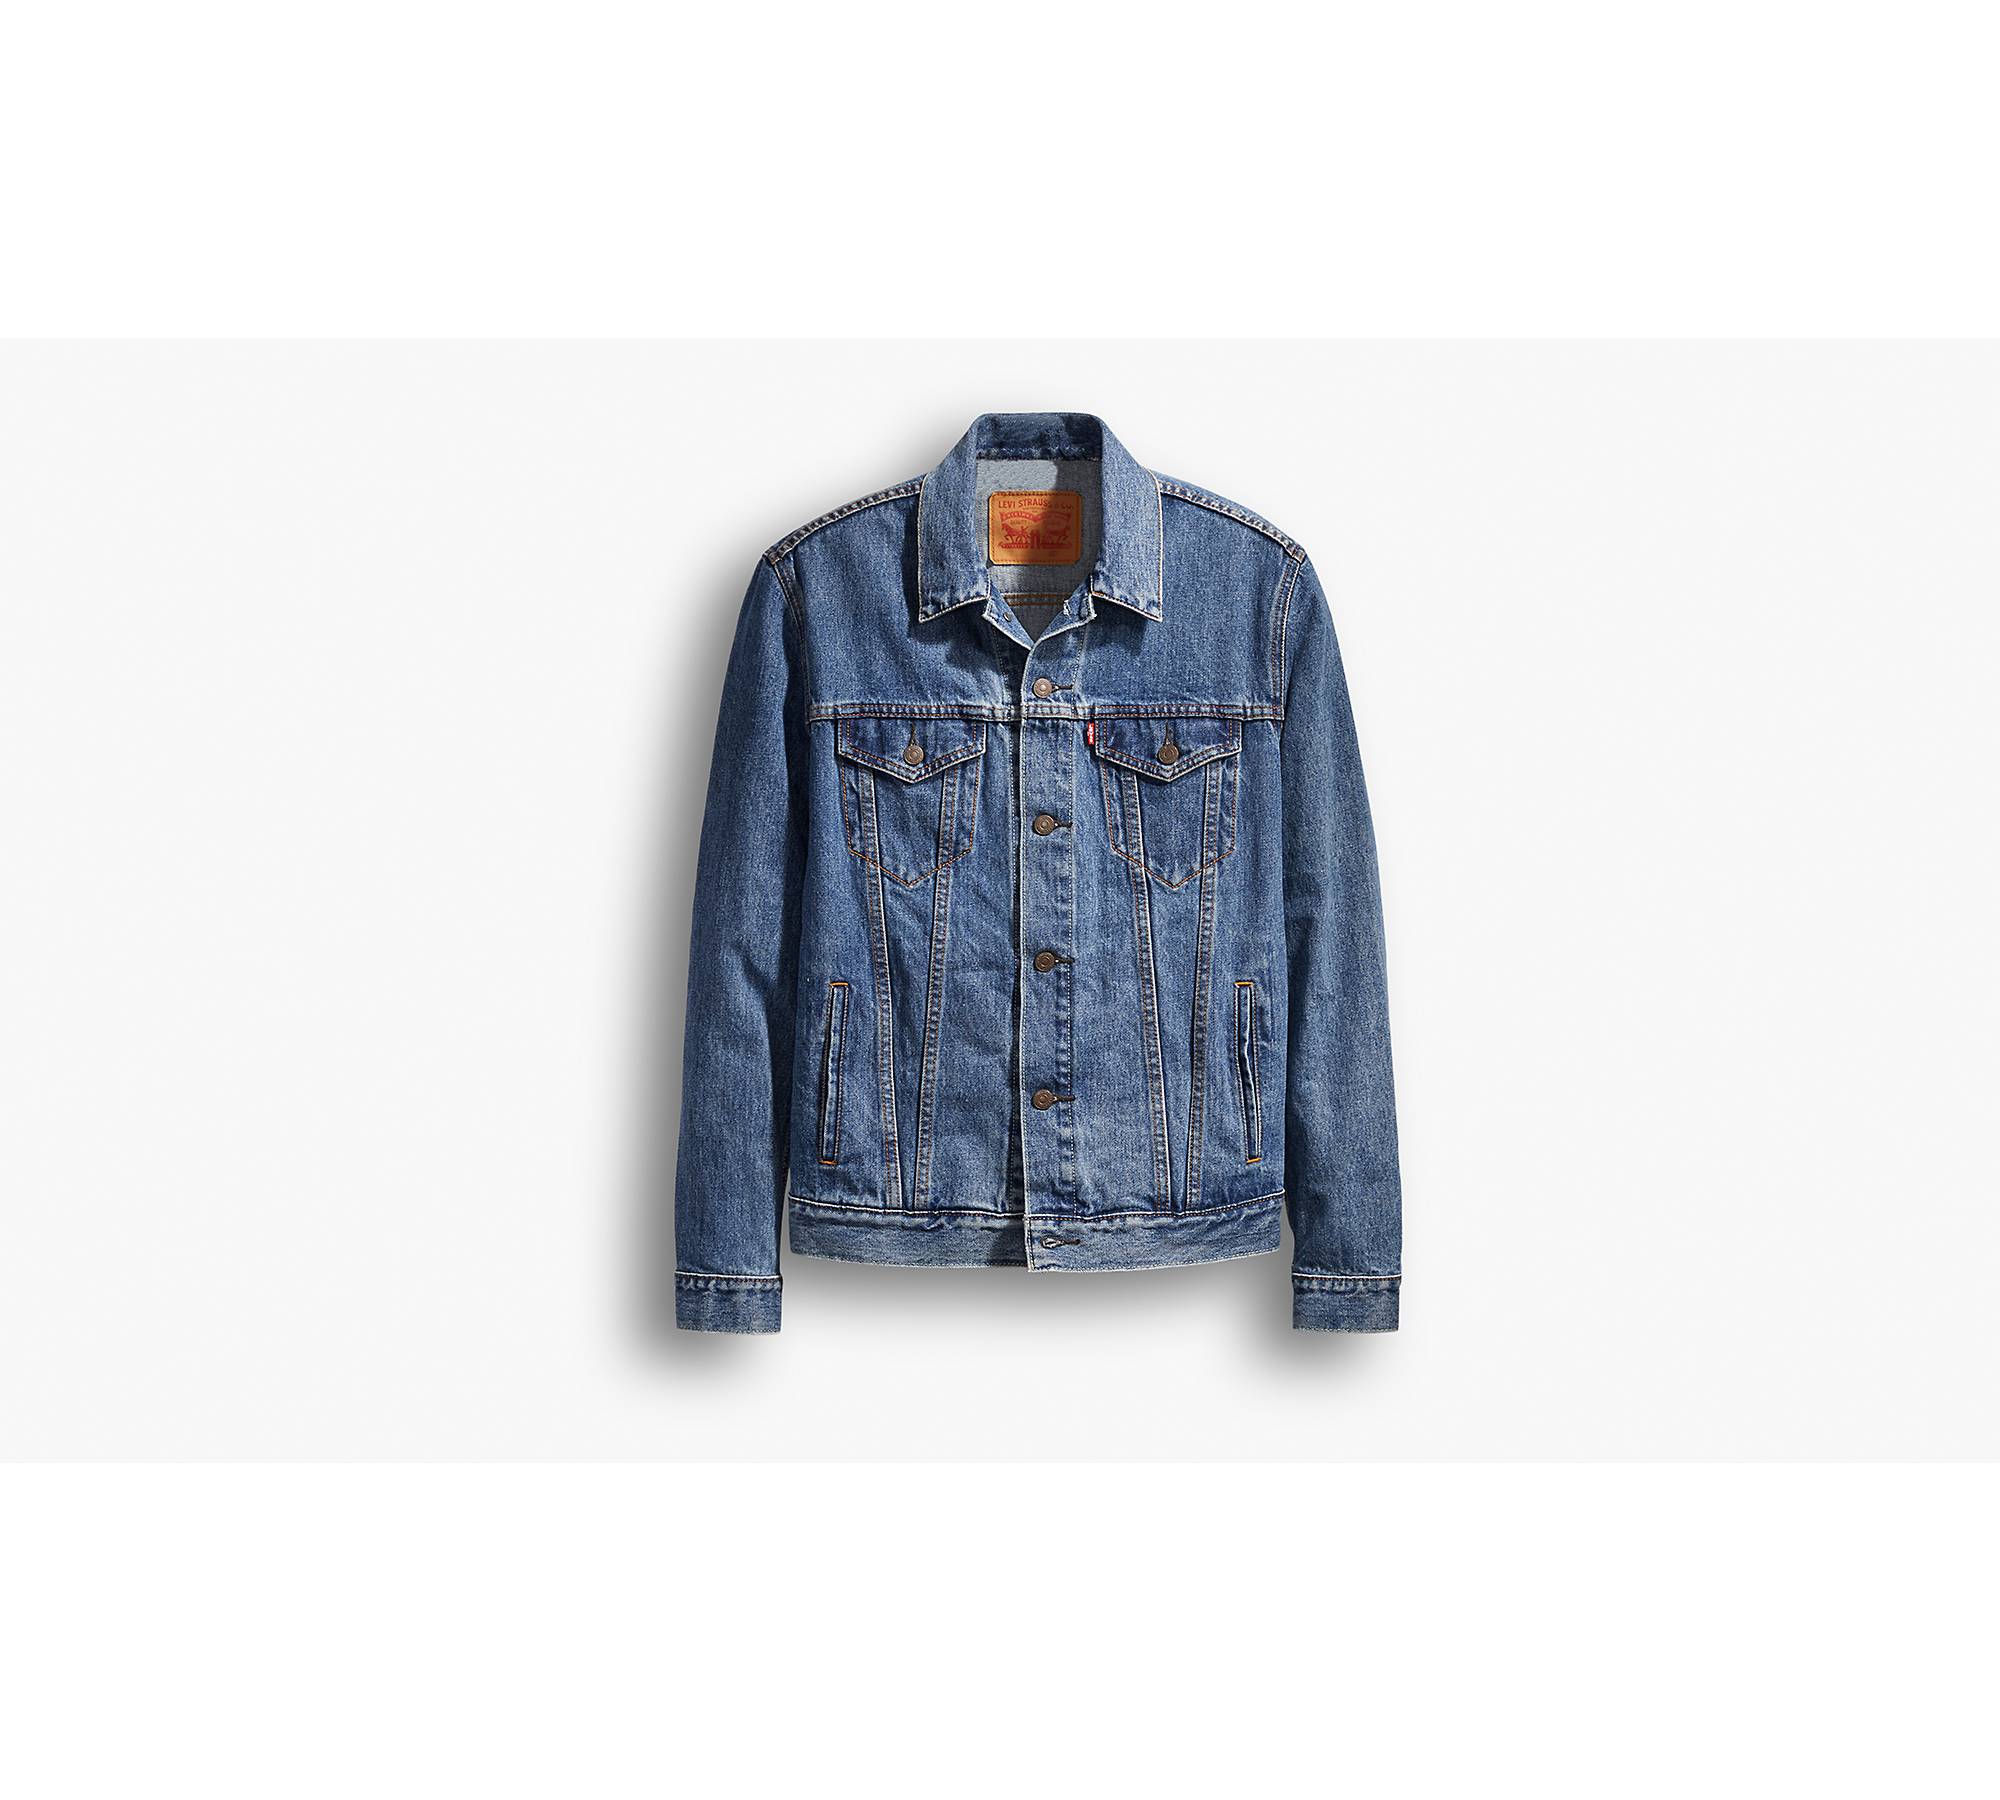 Denim jackets are a year round fashion accessory, order your